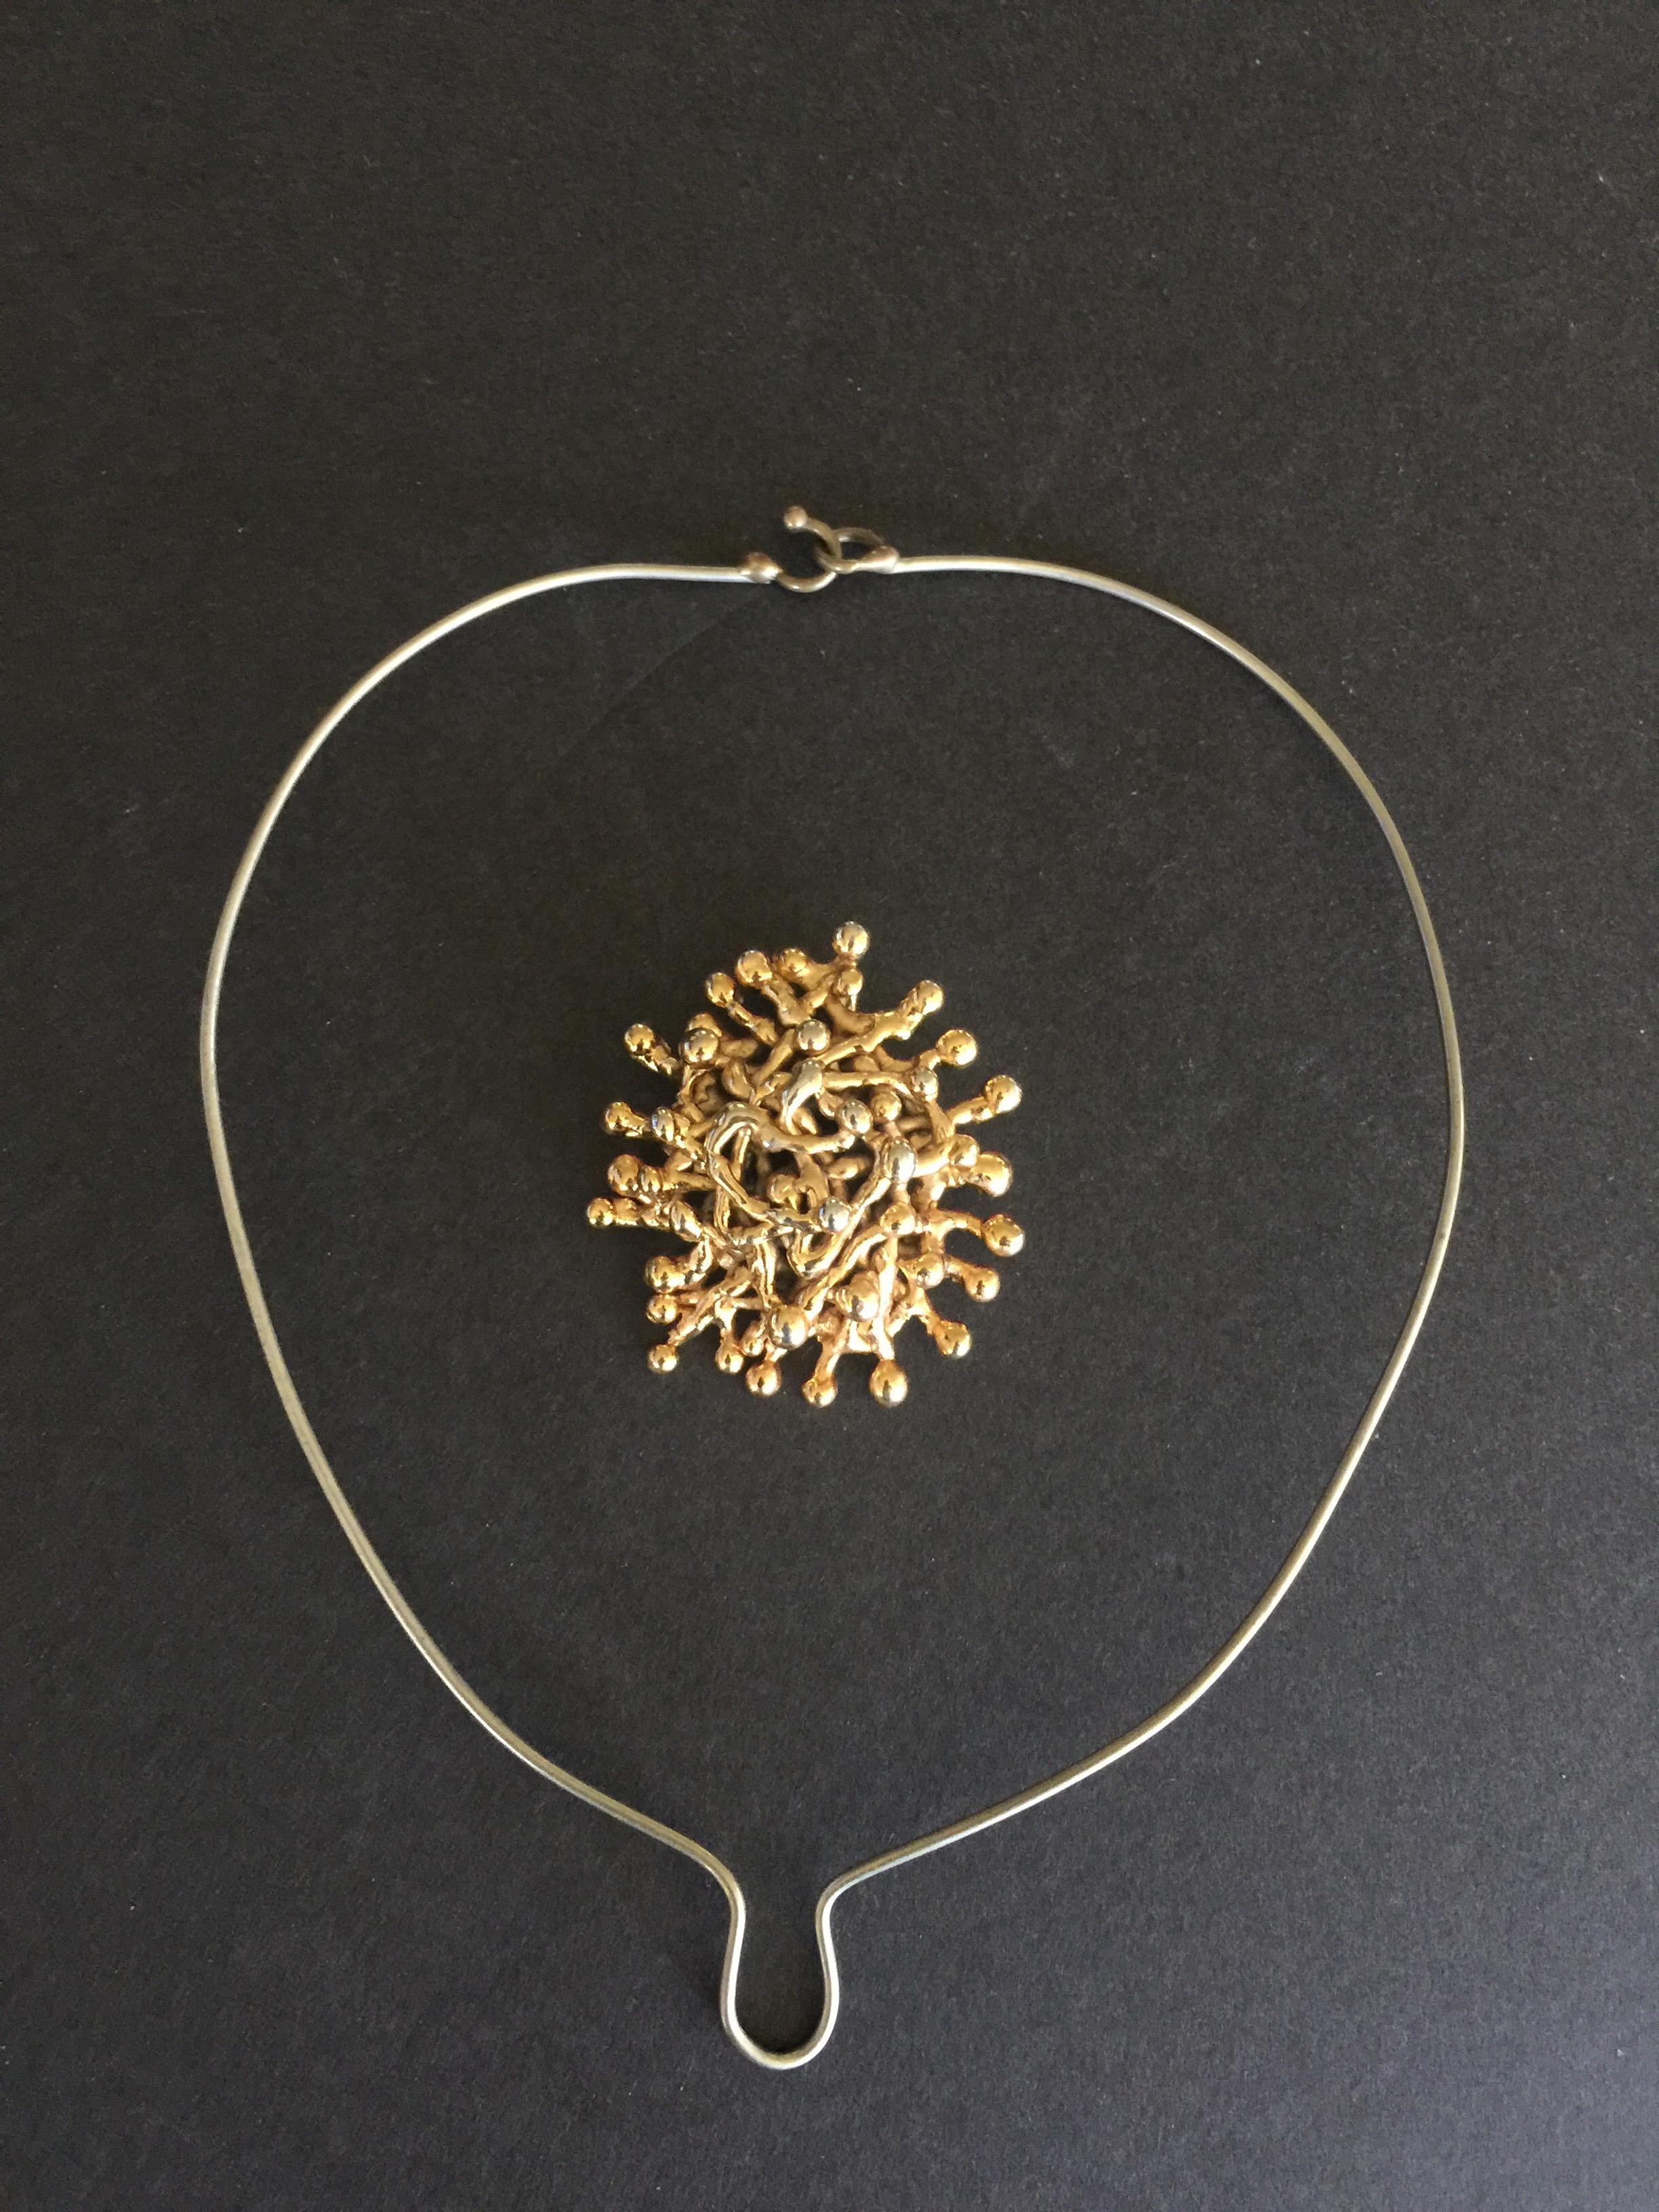 Women's or Men's Modernist Gold on Bronze Pendant Necklace by Ibram Lassaw For Sale